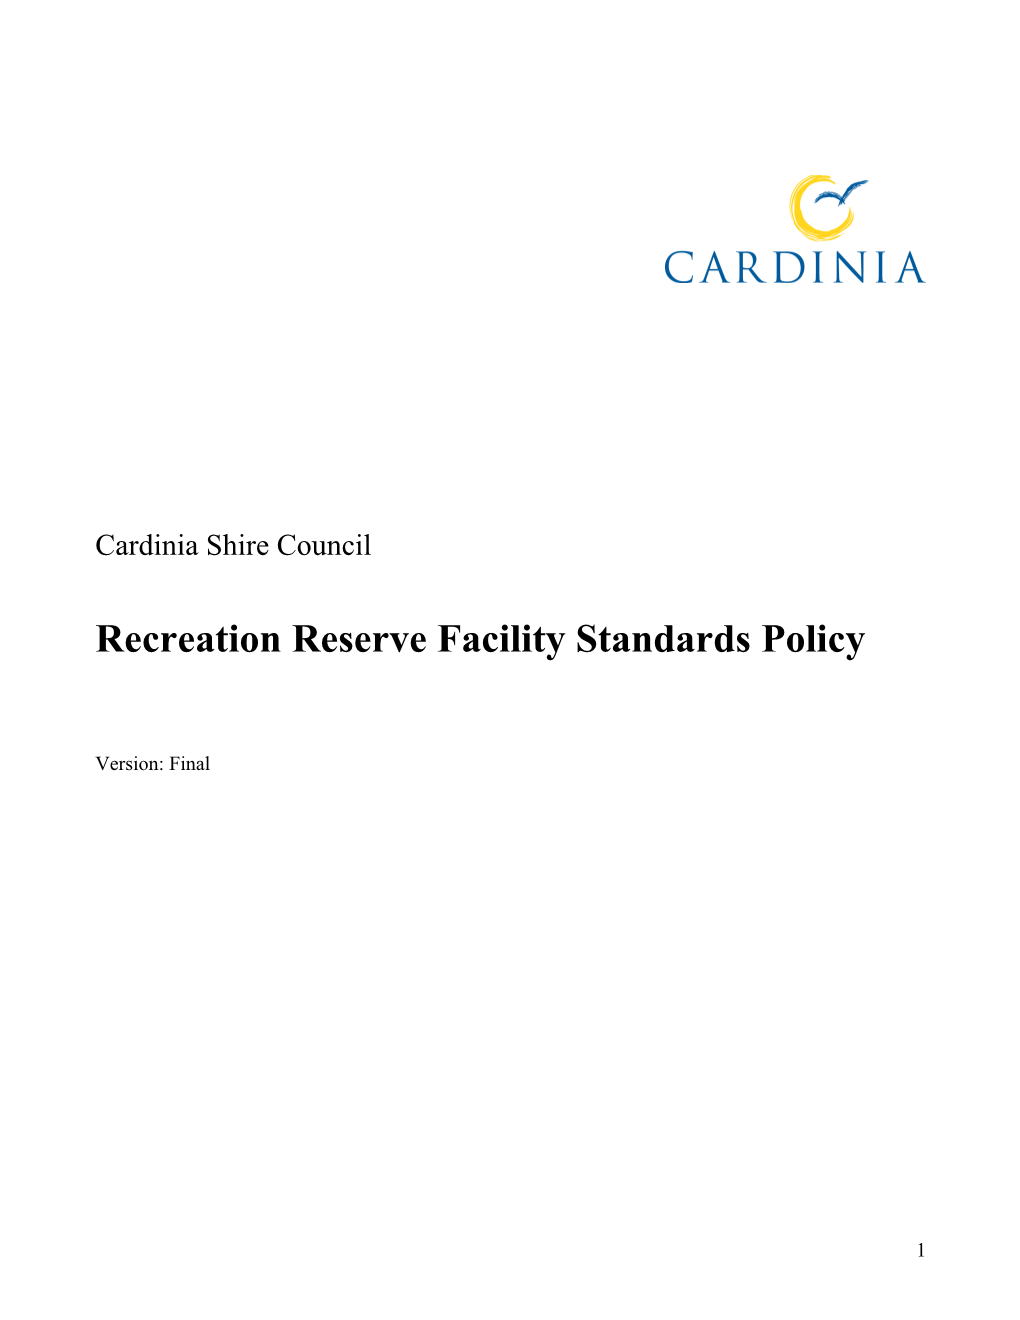 Recreation Reserve Facility Standards Policy